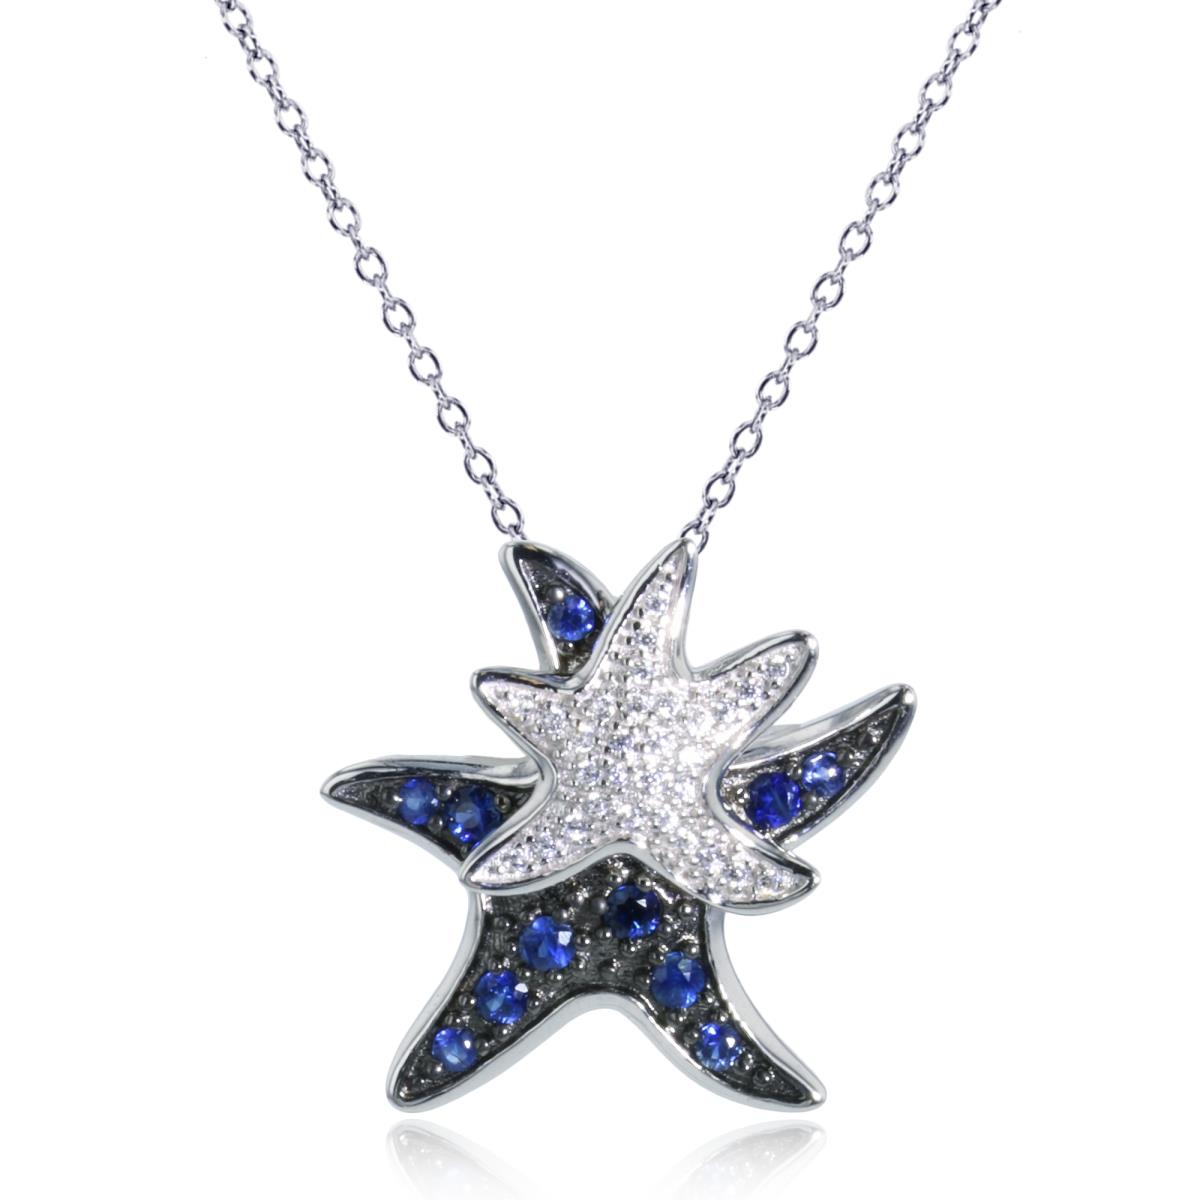 14K White Gold 0.09 Cttw Diamond & Rd Sapphire Double Star Fish 18" Necklace